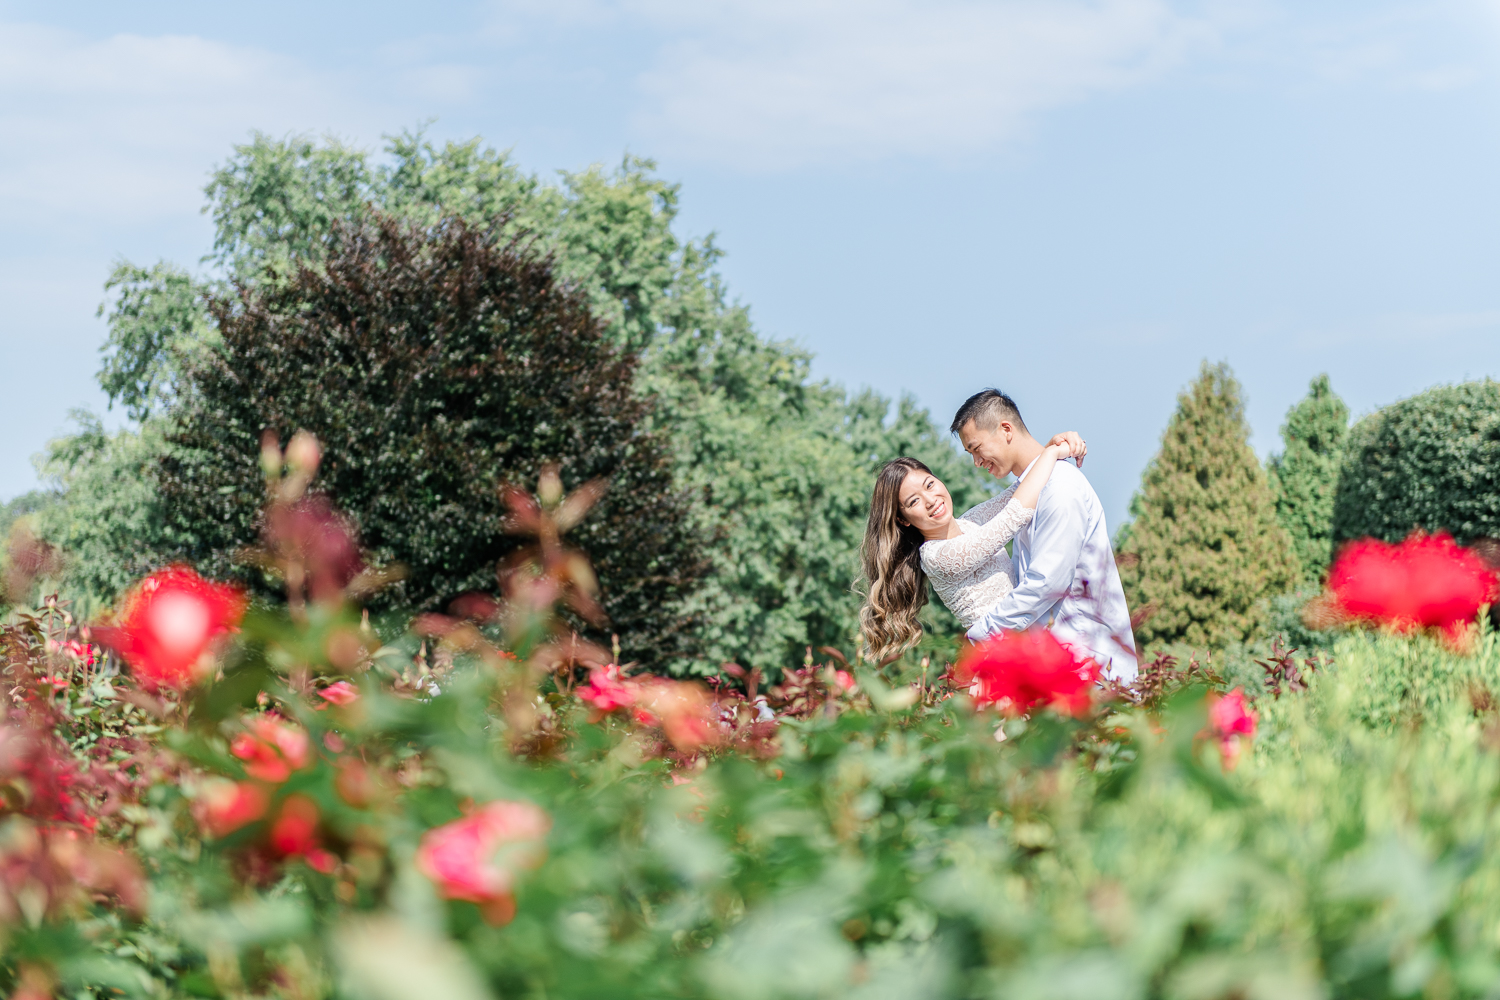 Boy dips girl as she looks into the camera smiling at Chicago Botanic Garden